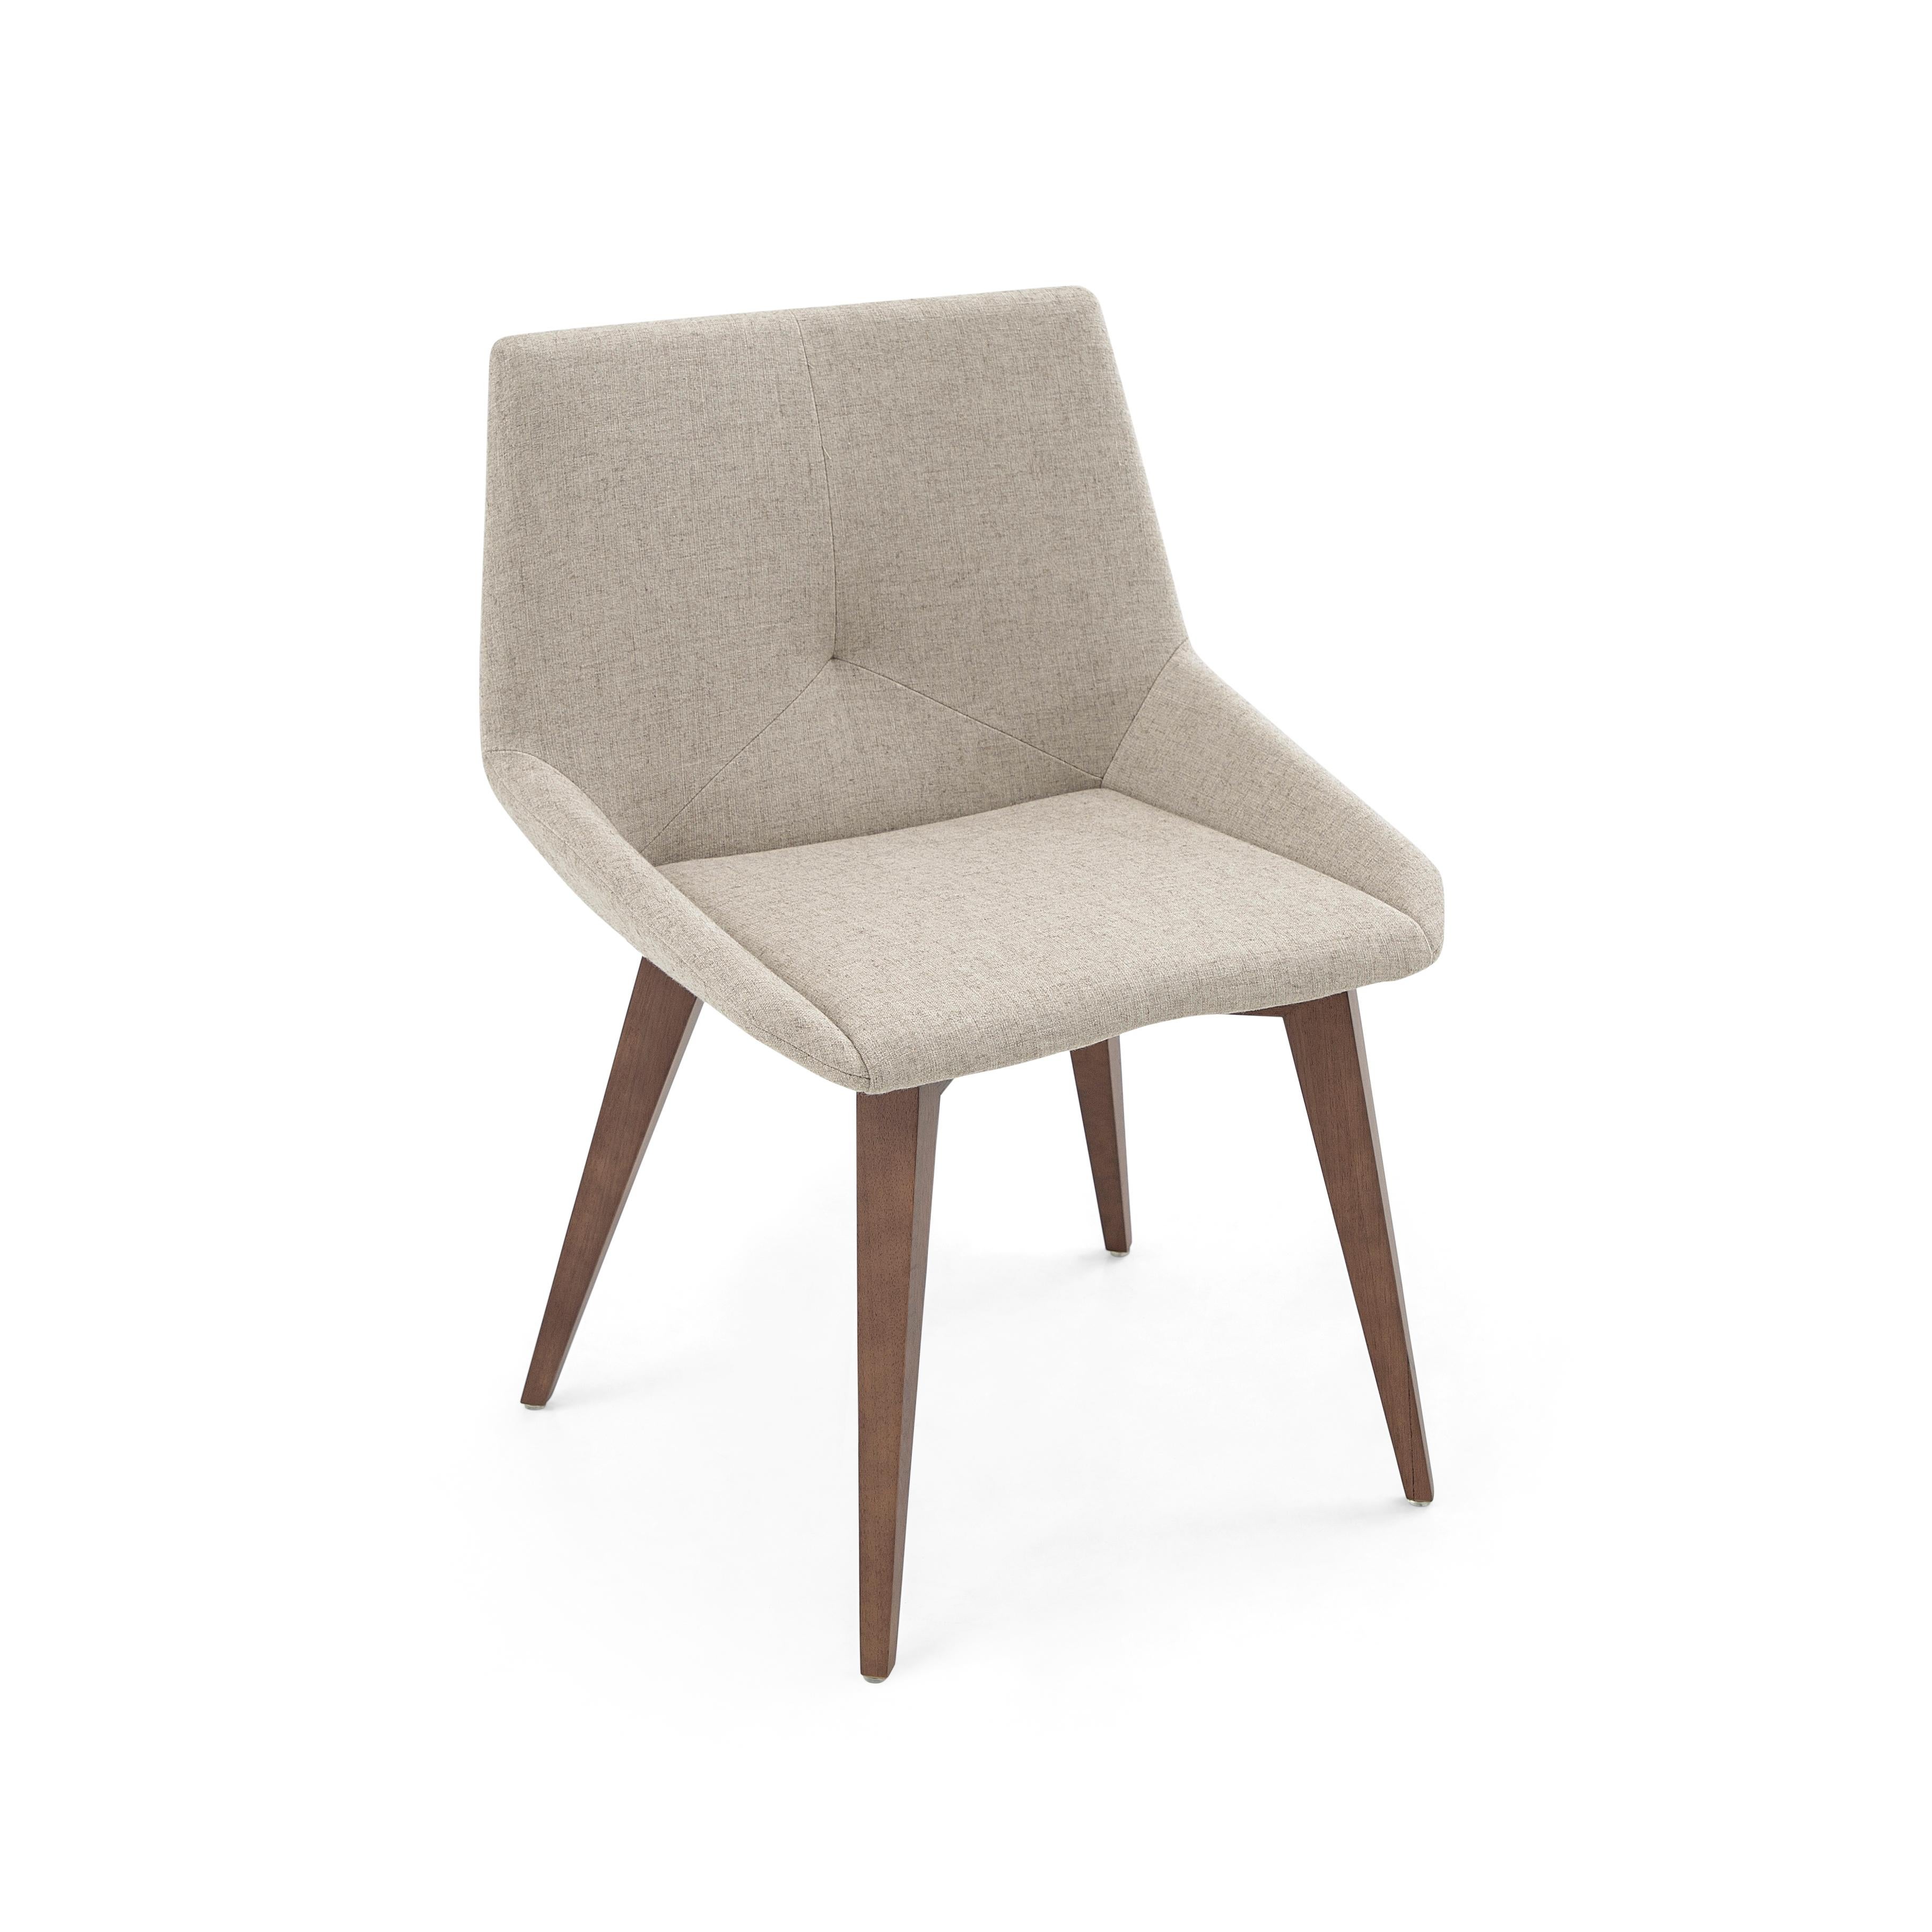 Contemporary Geometric Cubi Dining Chair with Walnut Wood Finish Base and Ivory Fabric For Sale